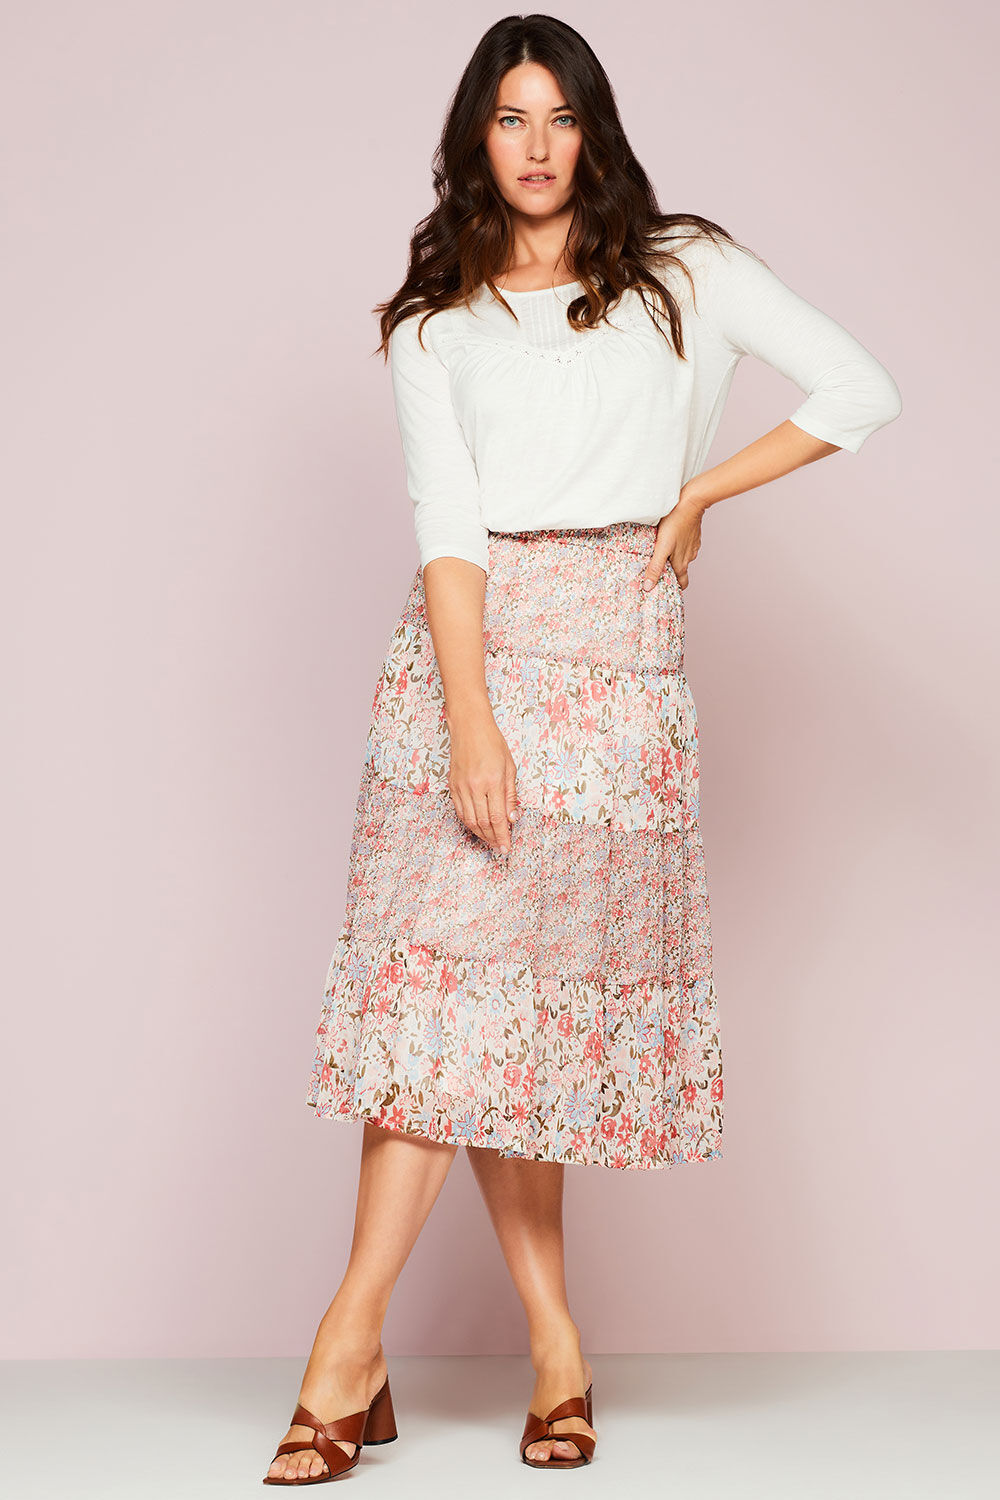 Bonmarche Pale Pink Ditsy Print Tiered Chiffon Elasticated Skirt, Size: 26 - Holiday Shop